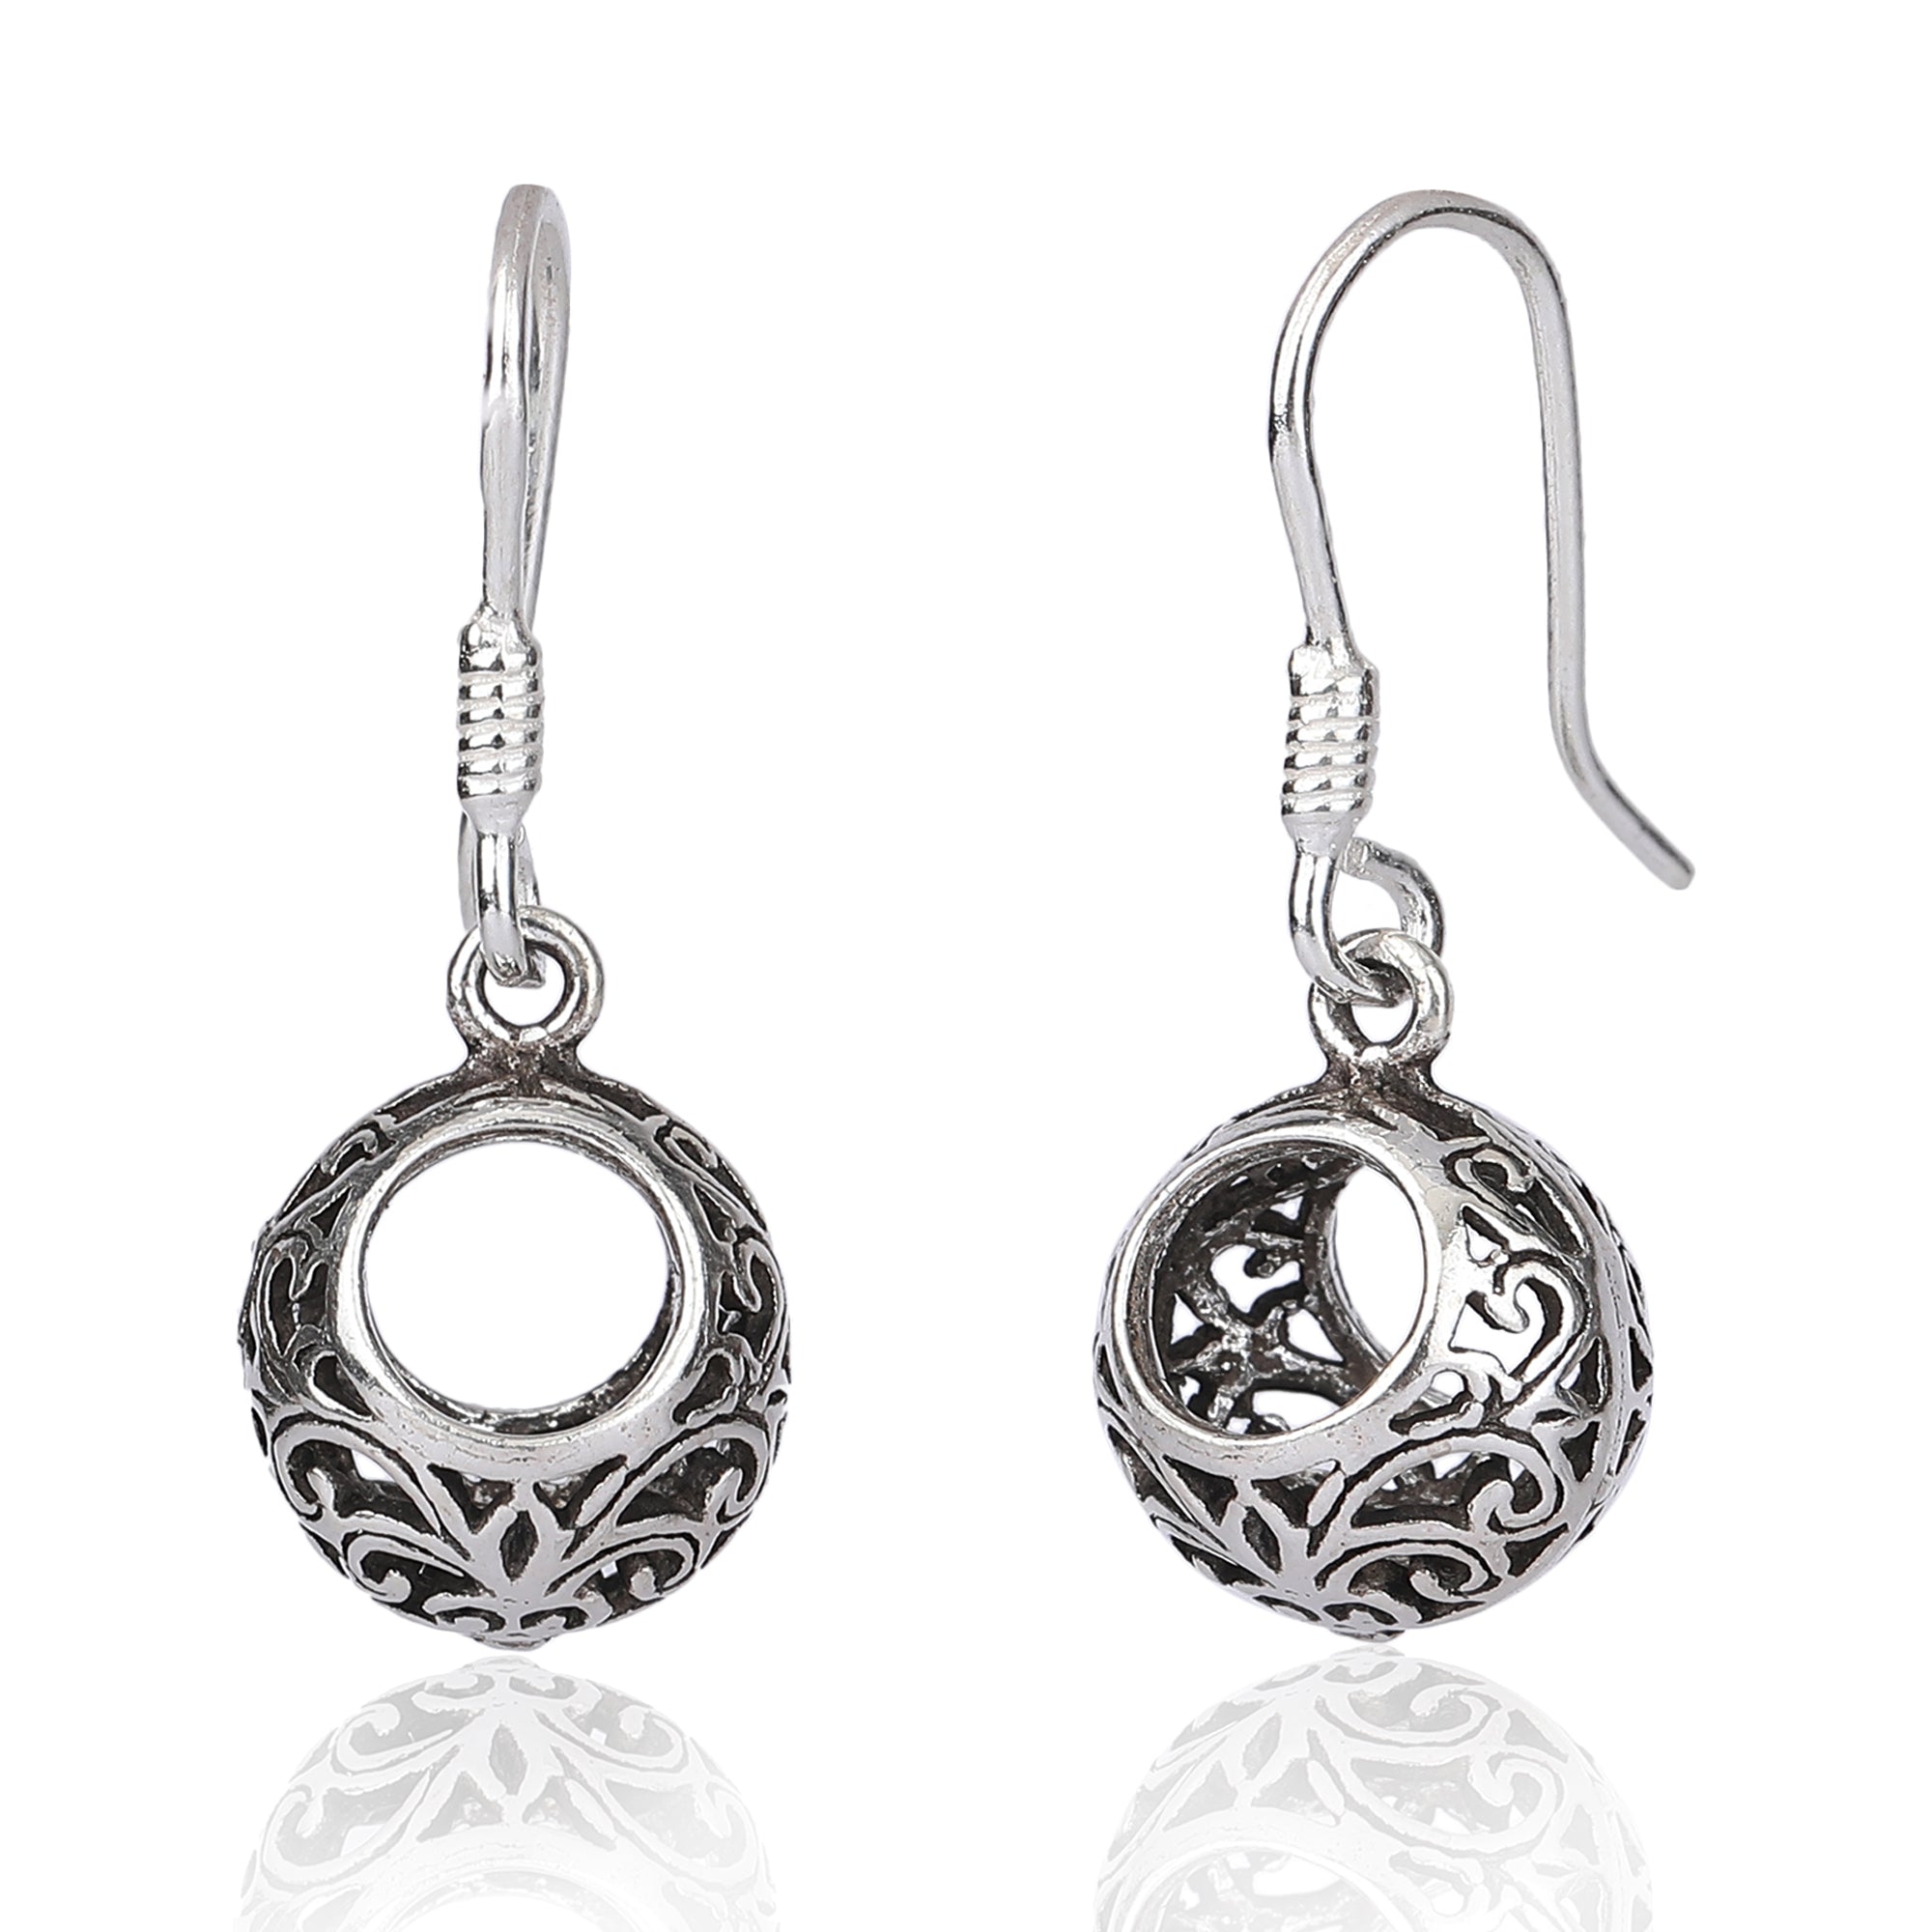 Round oxidized silver earring